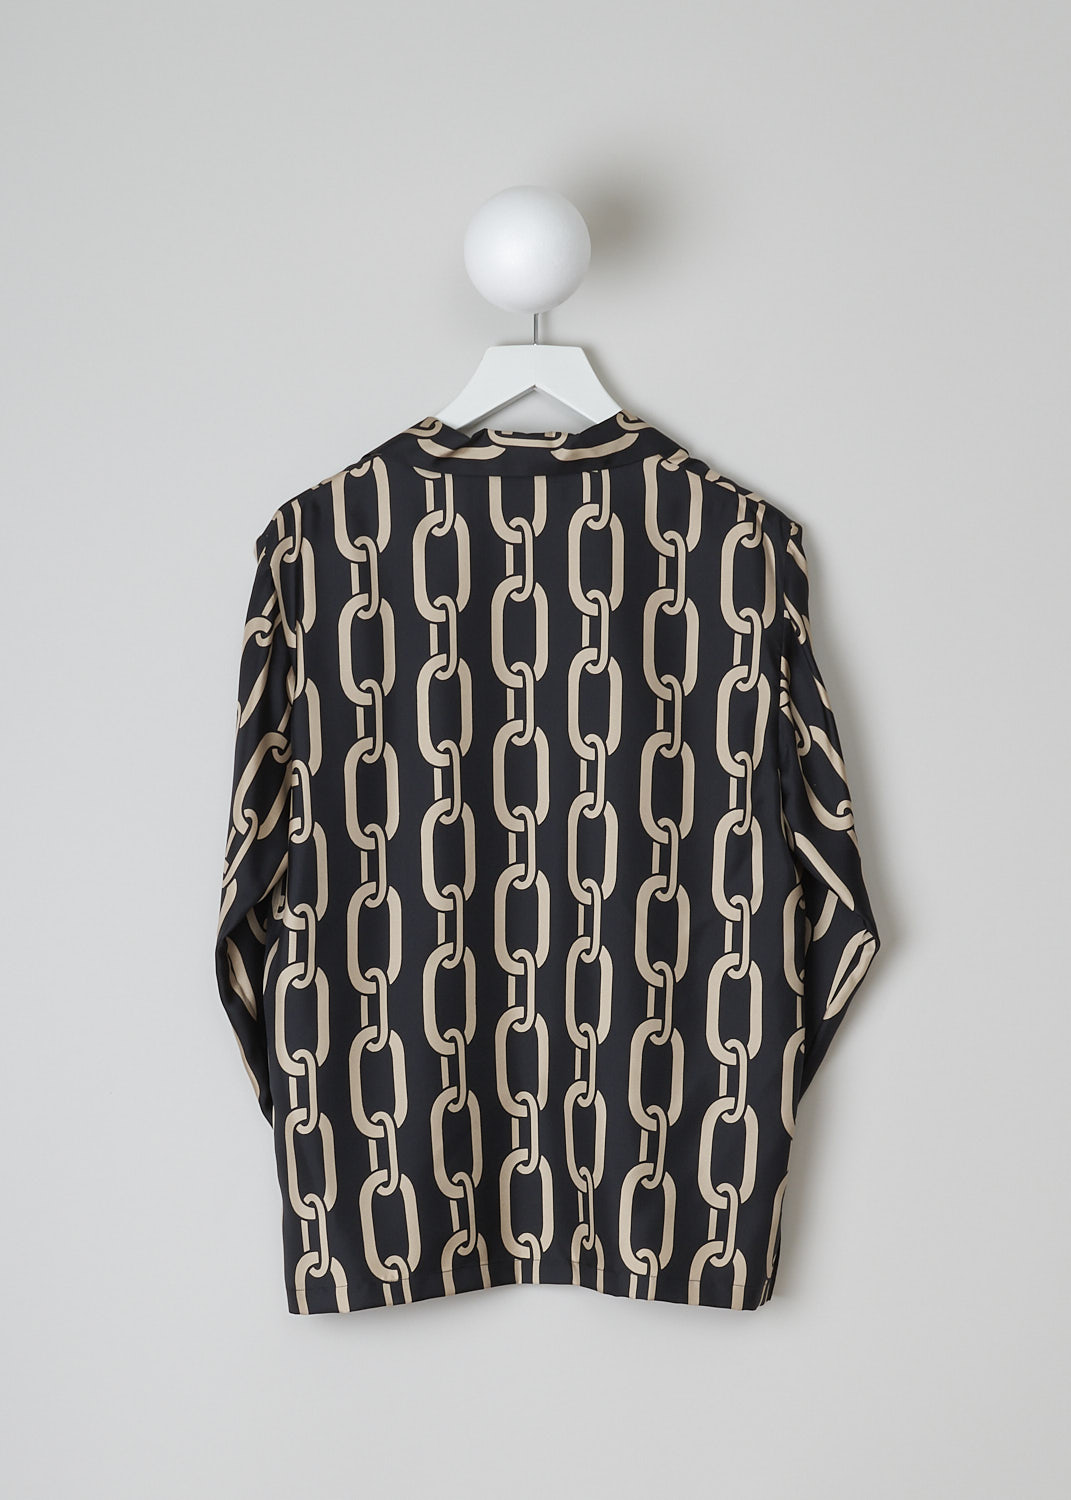 NILI LOTAN, JUSTE PYJAMA SHIRT WITH CHAINLINK PRINT, 12235_W856_JUSTE_PYJAMA_SHIRT, Black, Gold, Print, Back, This silk Juste Pyjama shirt has a black base with an all-over chainlink print in gold. The blouse has a notched lapel, a front button closure and a breast pocket. The blouse has a straight hemline with small side slits.  
